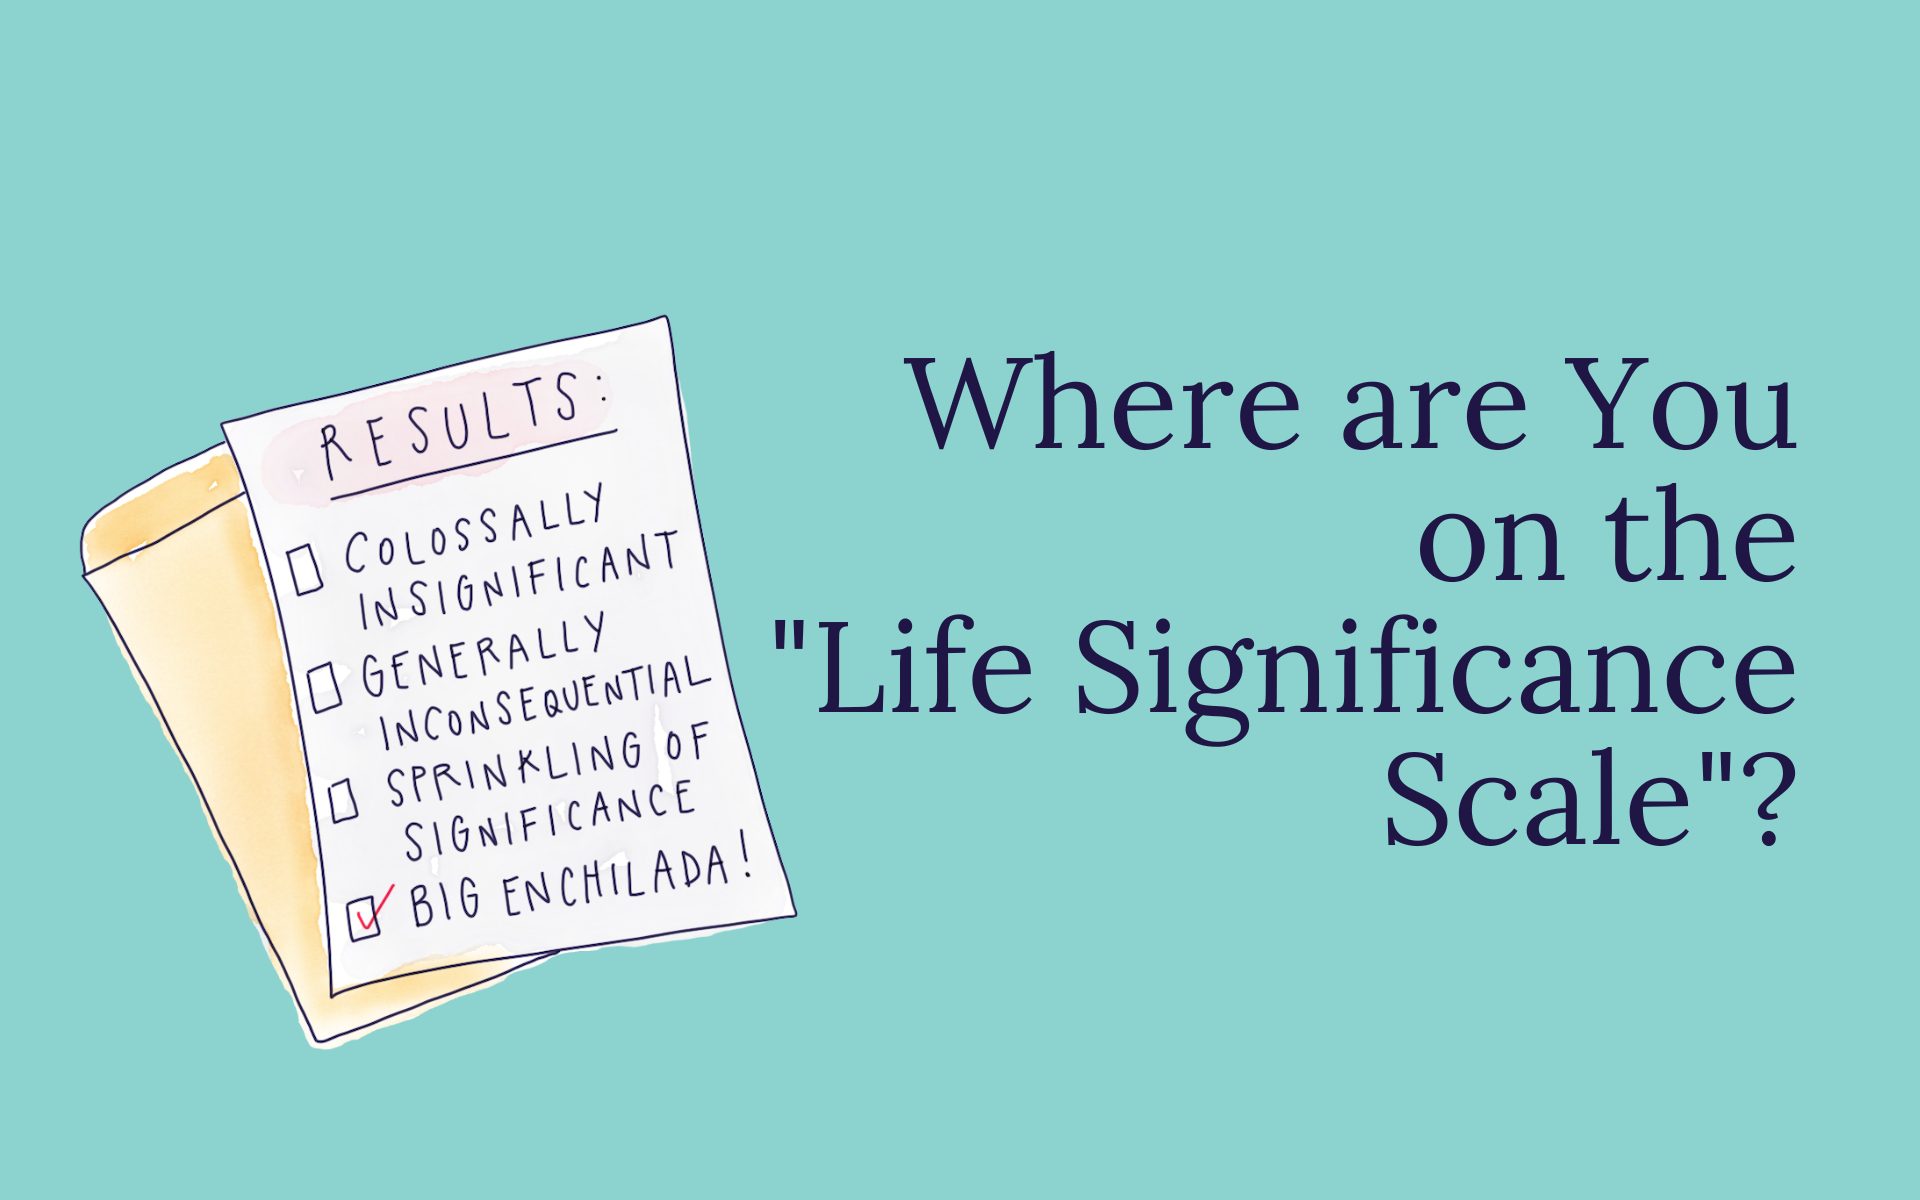 Where are You on the "Life Significance Scale"?